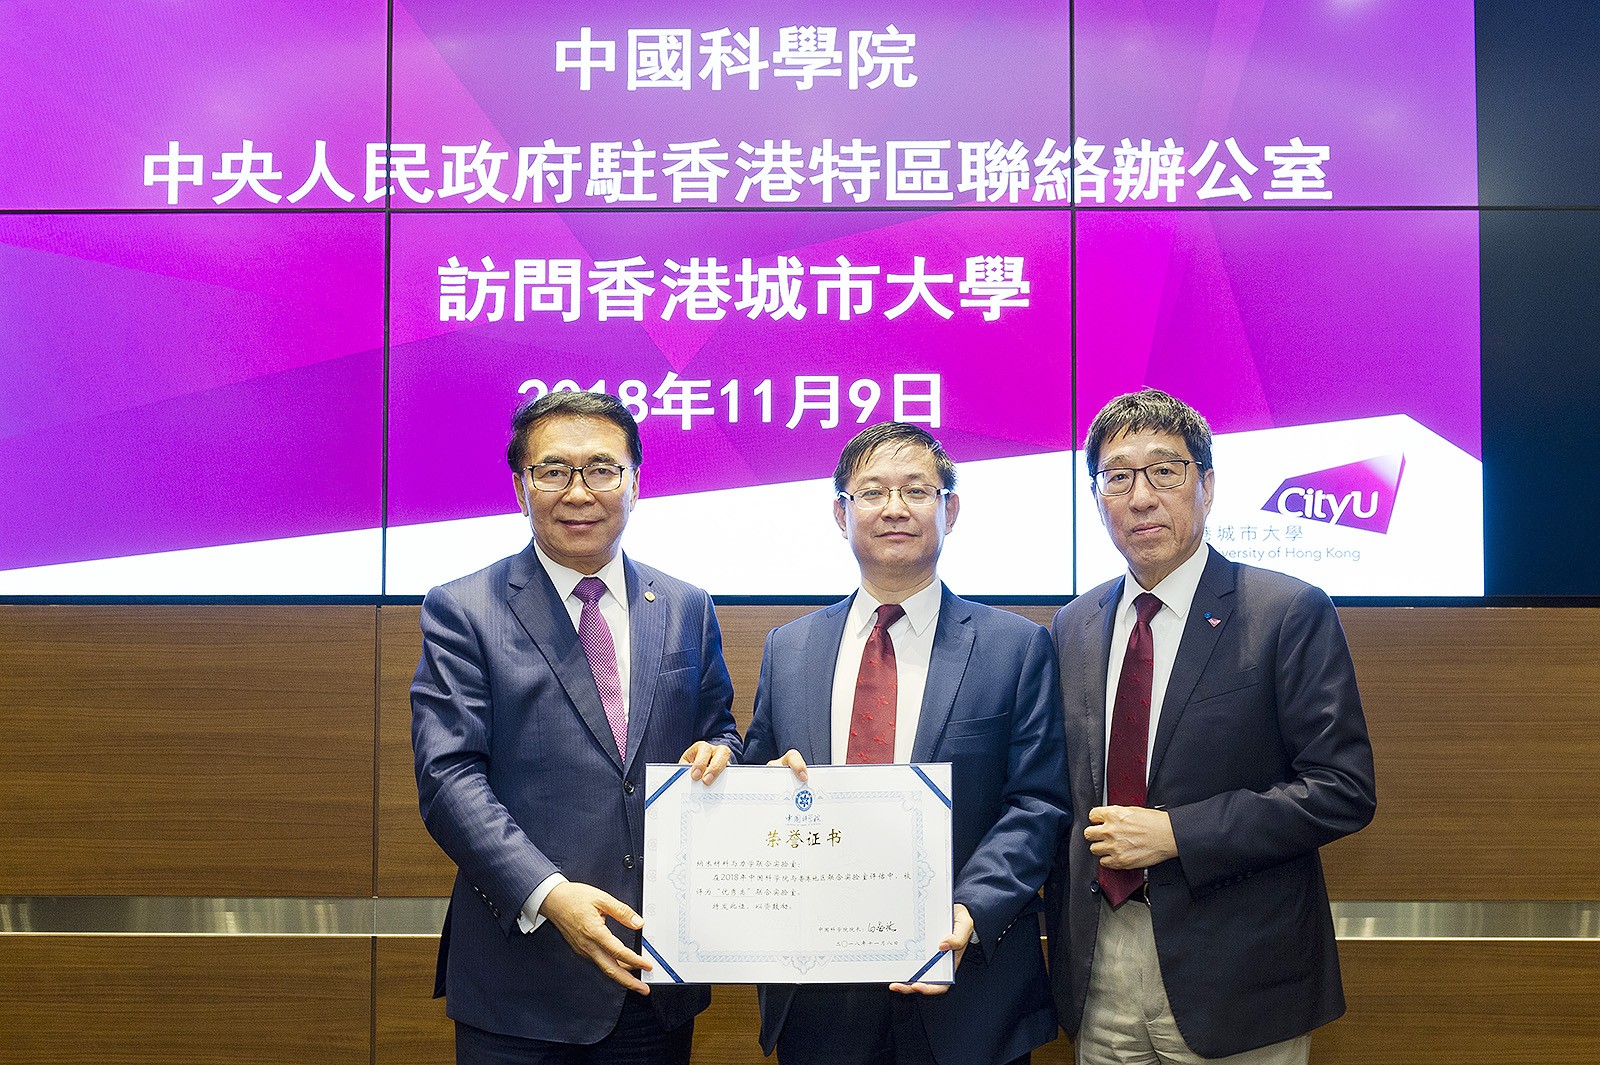 Professor Bai (left) presents an honorary certificate to Professor Kuo (right) and Professor Lu (middle) in recognition of CityU’s Joint Laboratory of Nanomaterials and Nanomechanics as an “outstanding joint laboratory”.